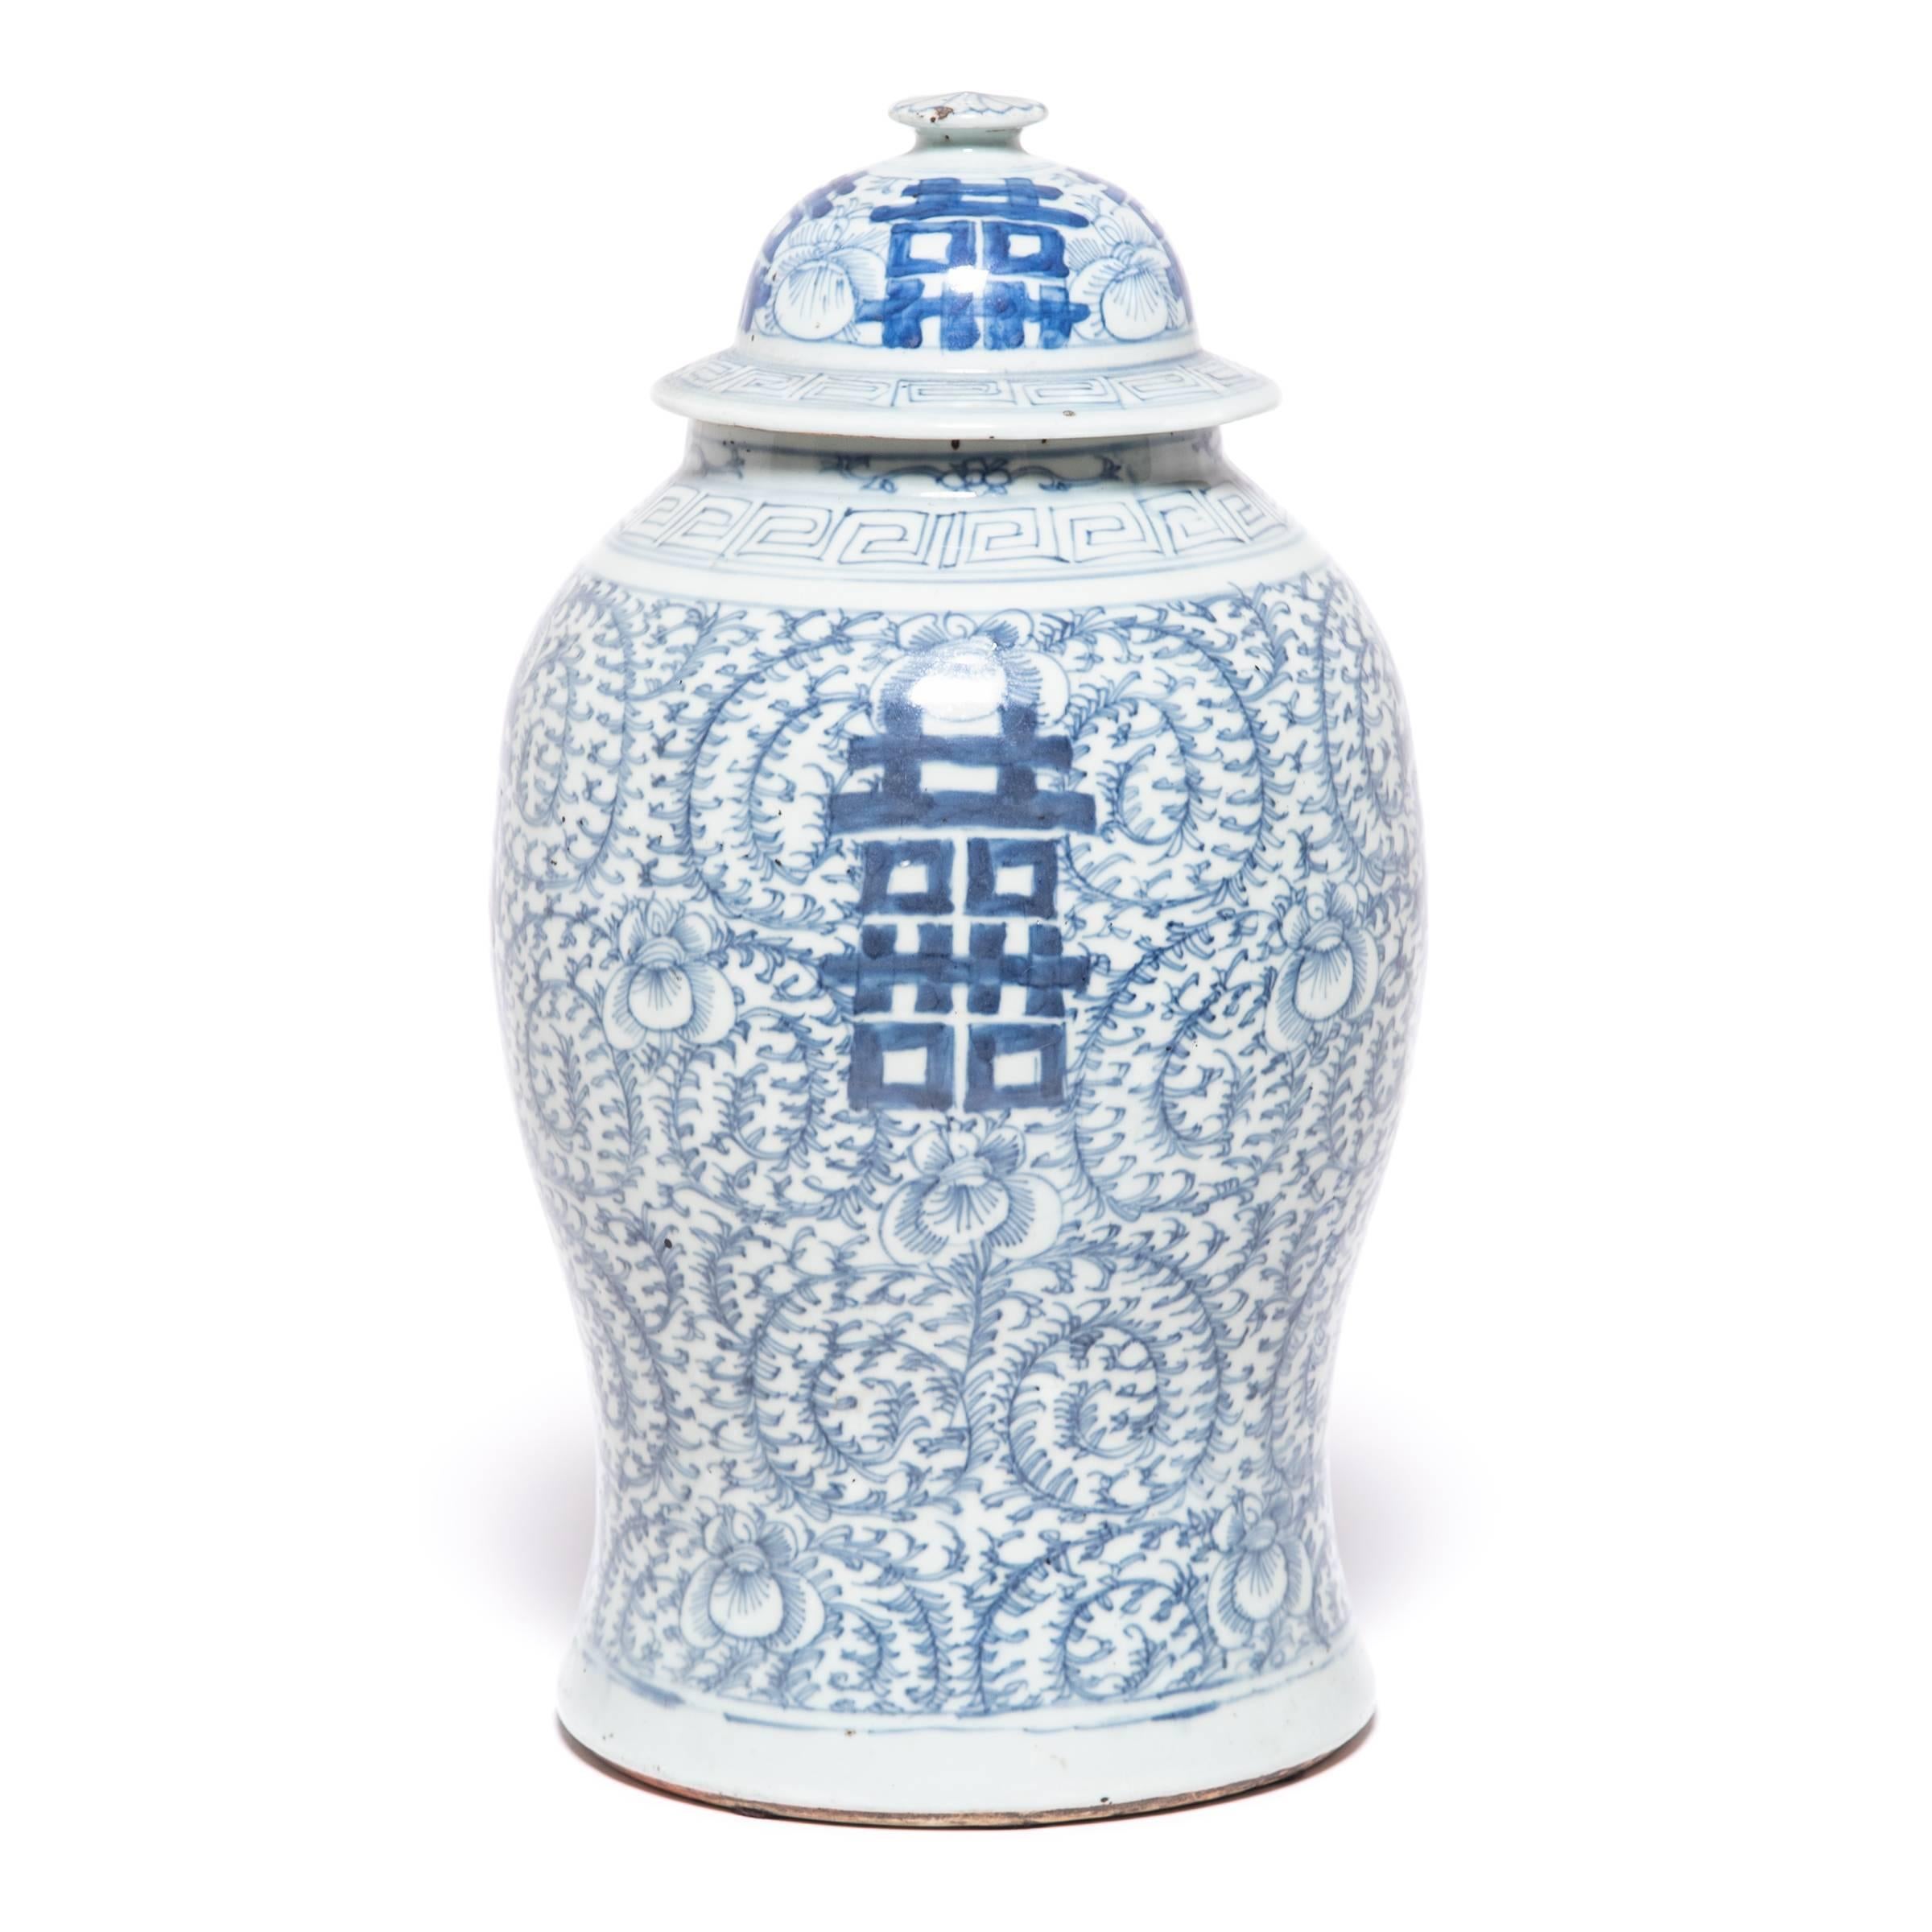 Glazed 19th Century Chinese Blue and White Double Happiness Jar